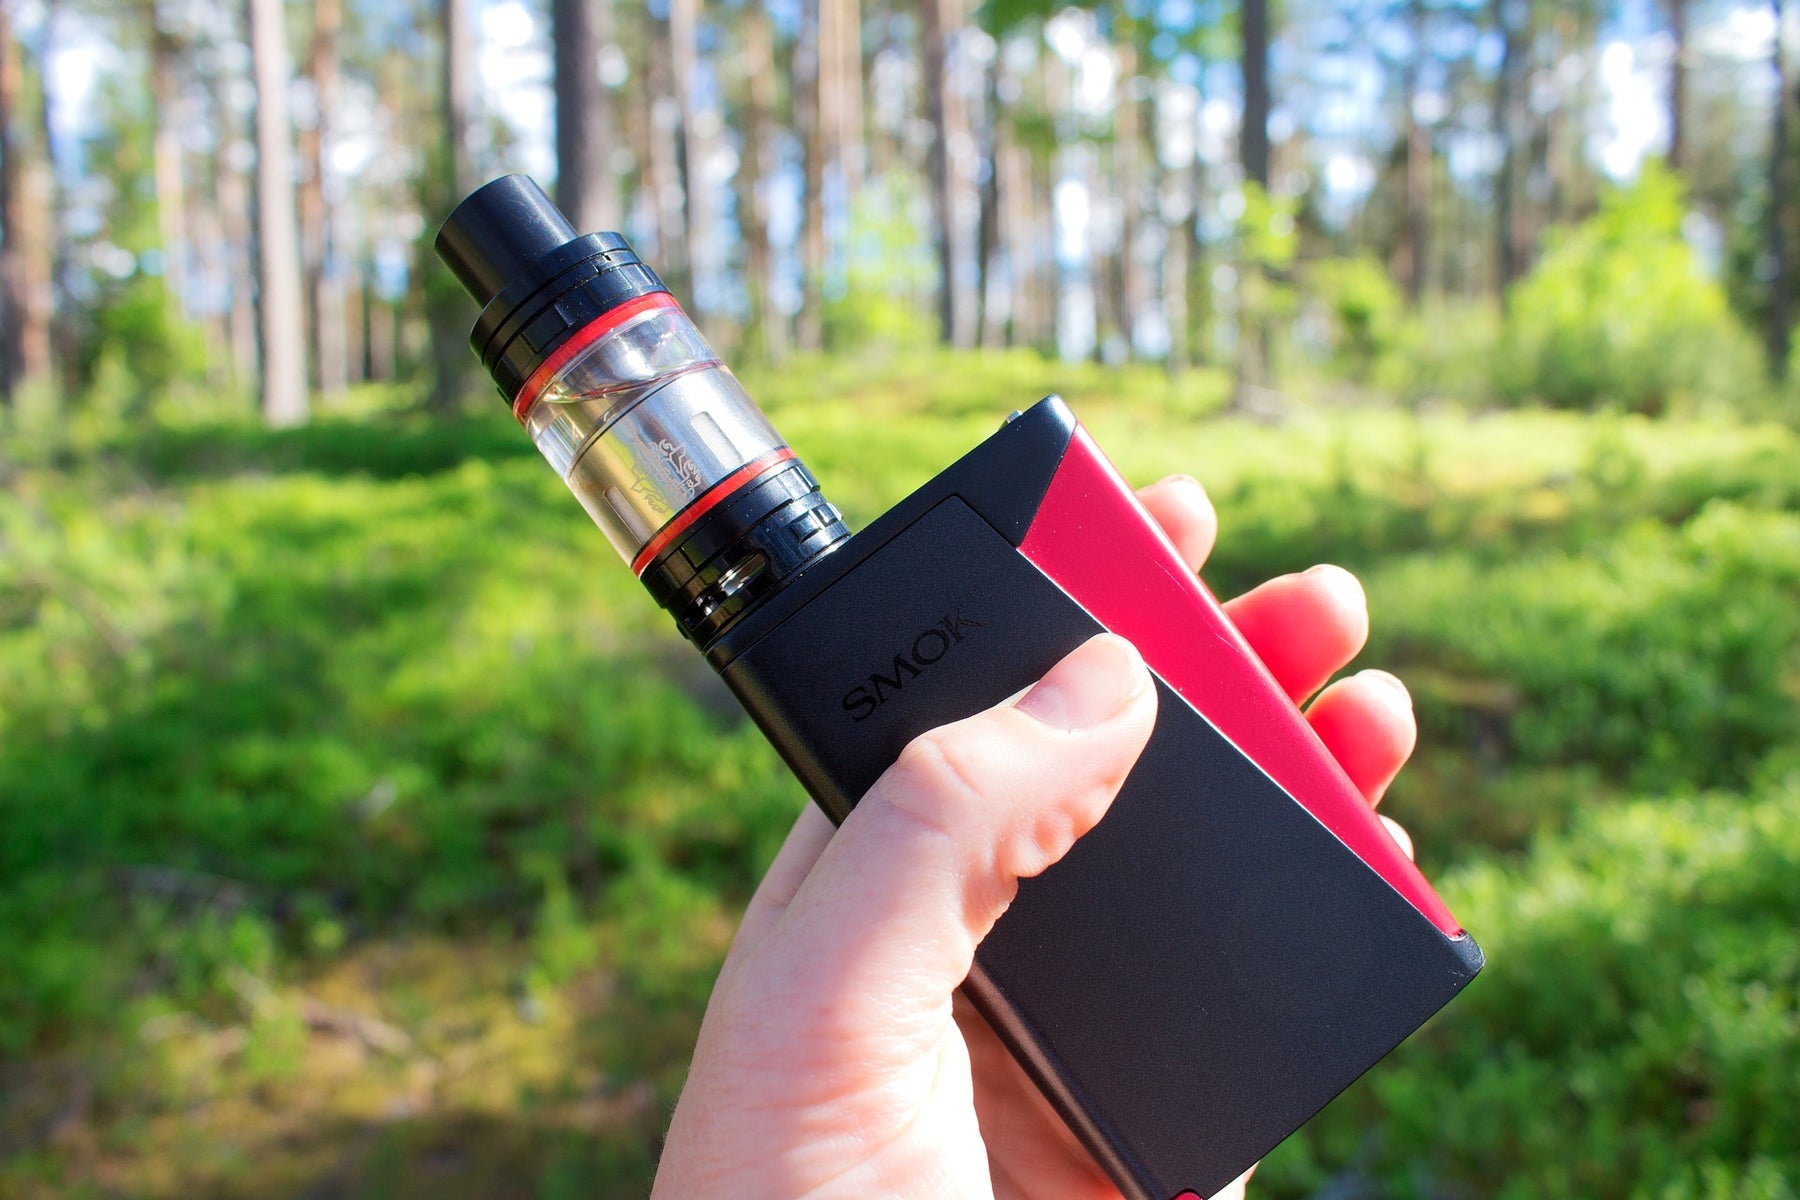 What You Need to Know about Mixing E-Juice by Weight - Our Guide